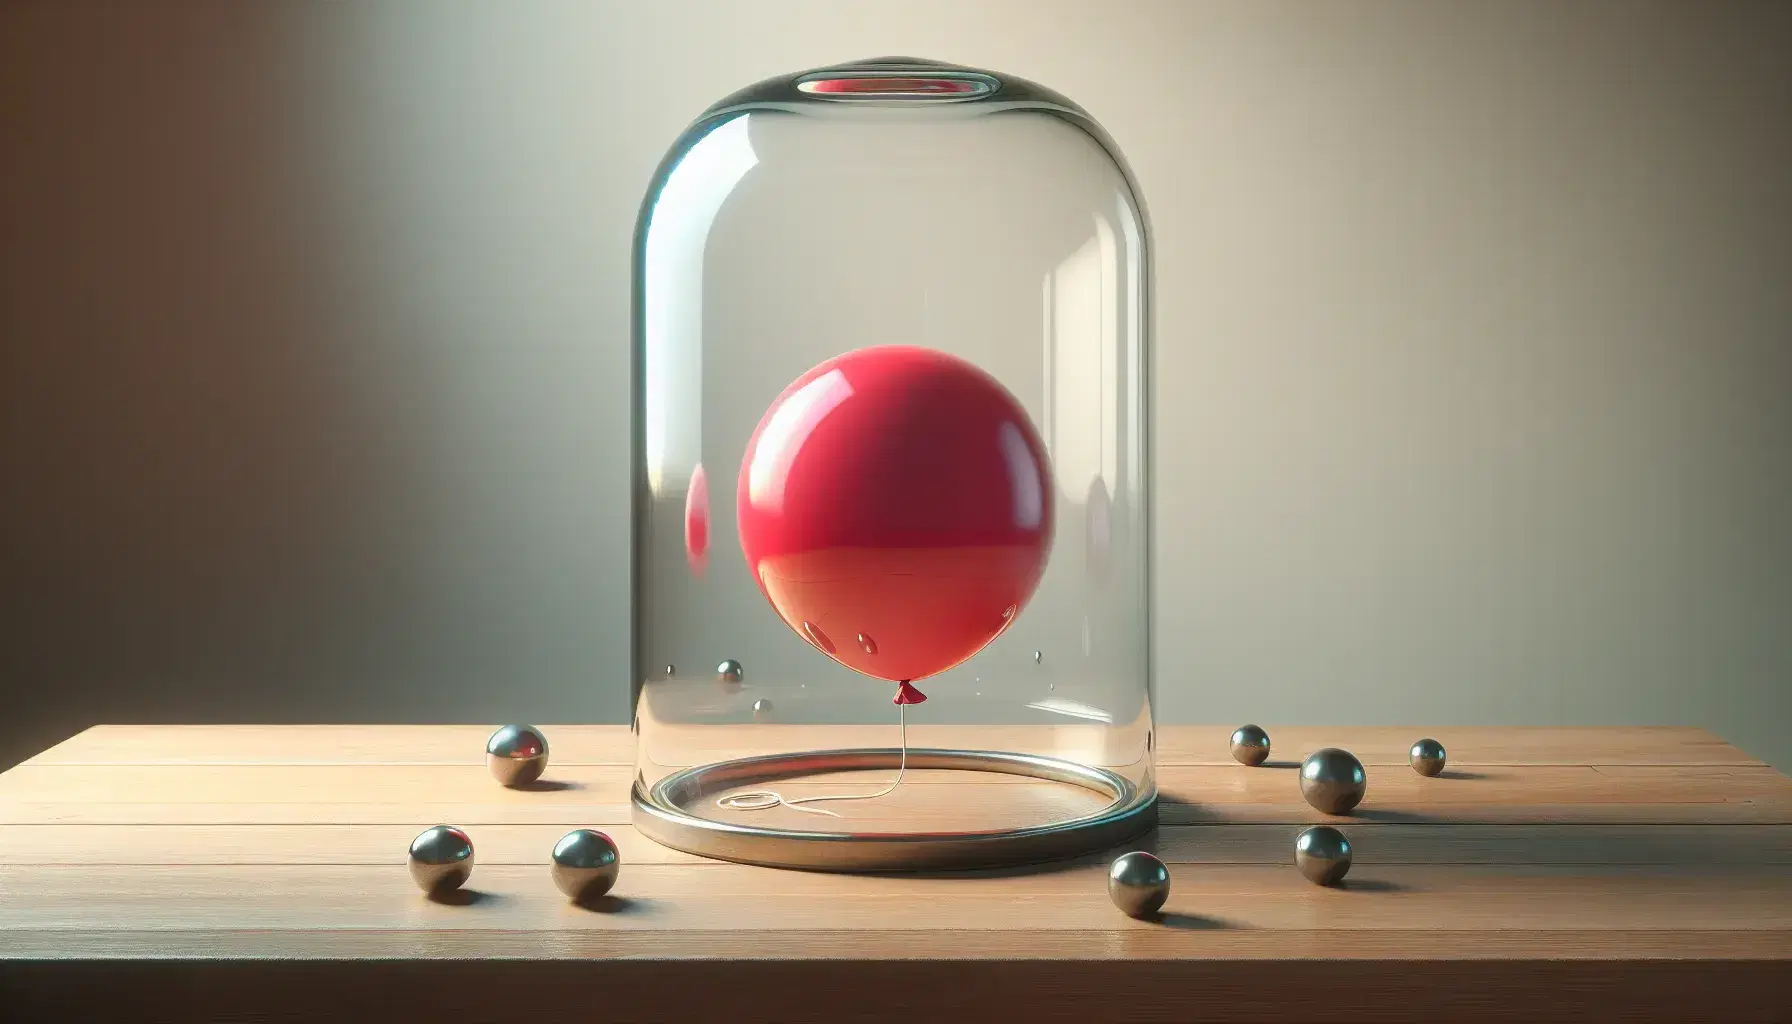 Semi-deflated red helium balloon floats in glass jar on wooden table, surrounded by cylindrical metal weights.